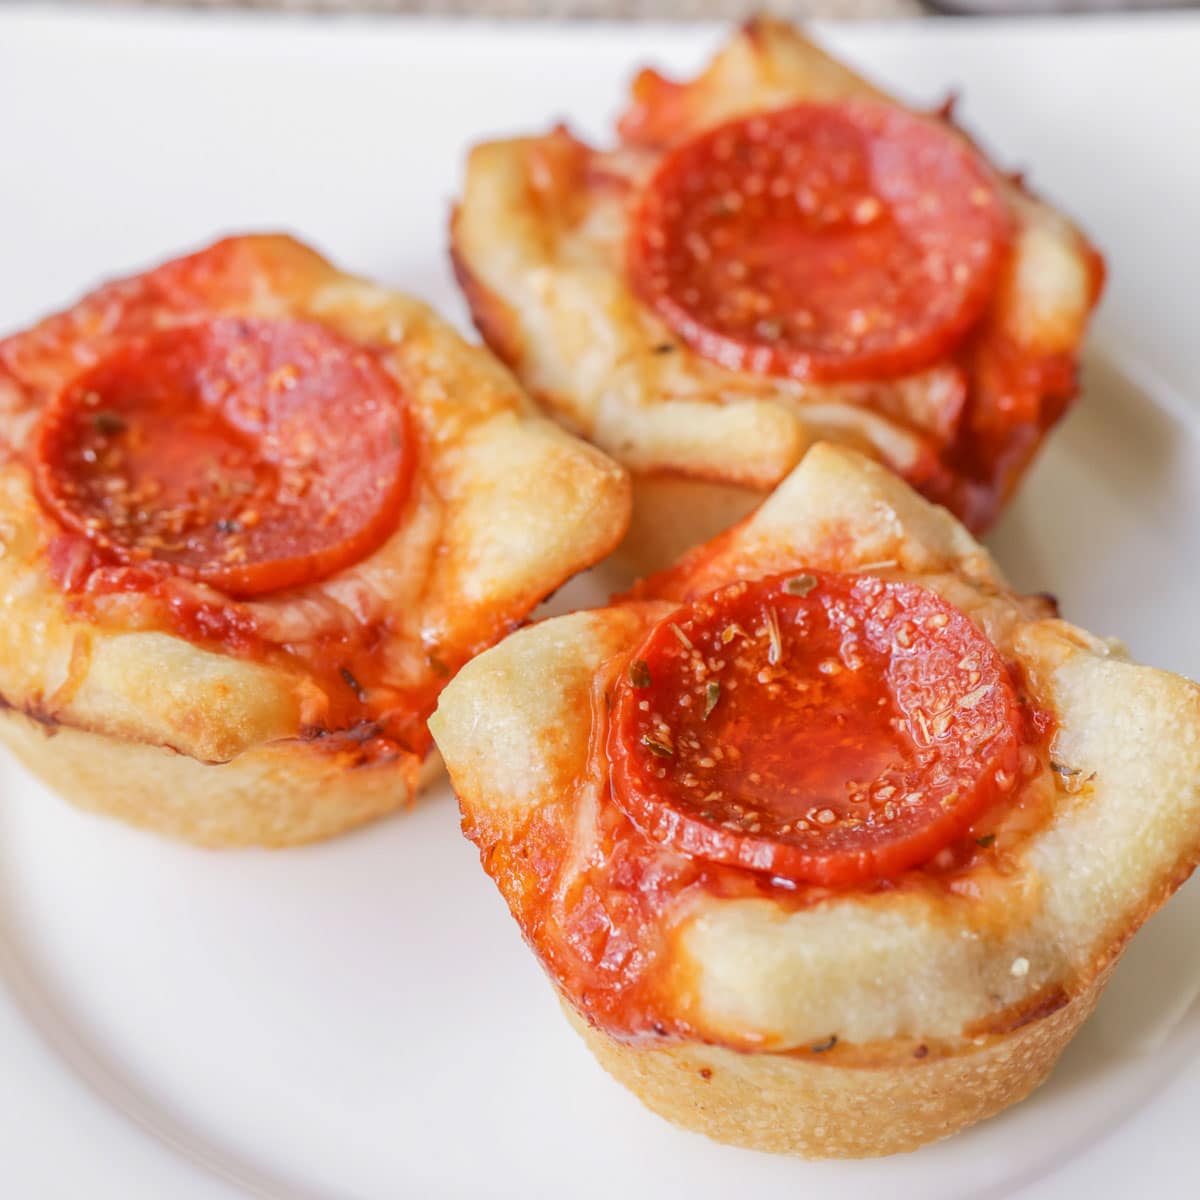 Halloween appetizers - close up of mini deep dish pizzas served on a white plate.